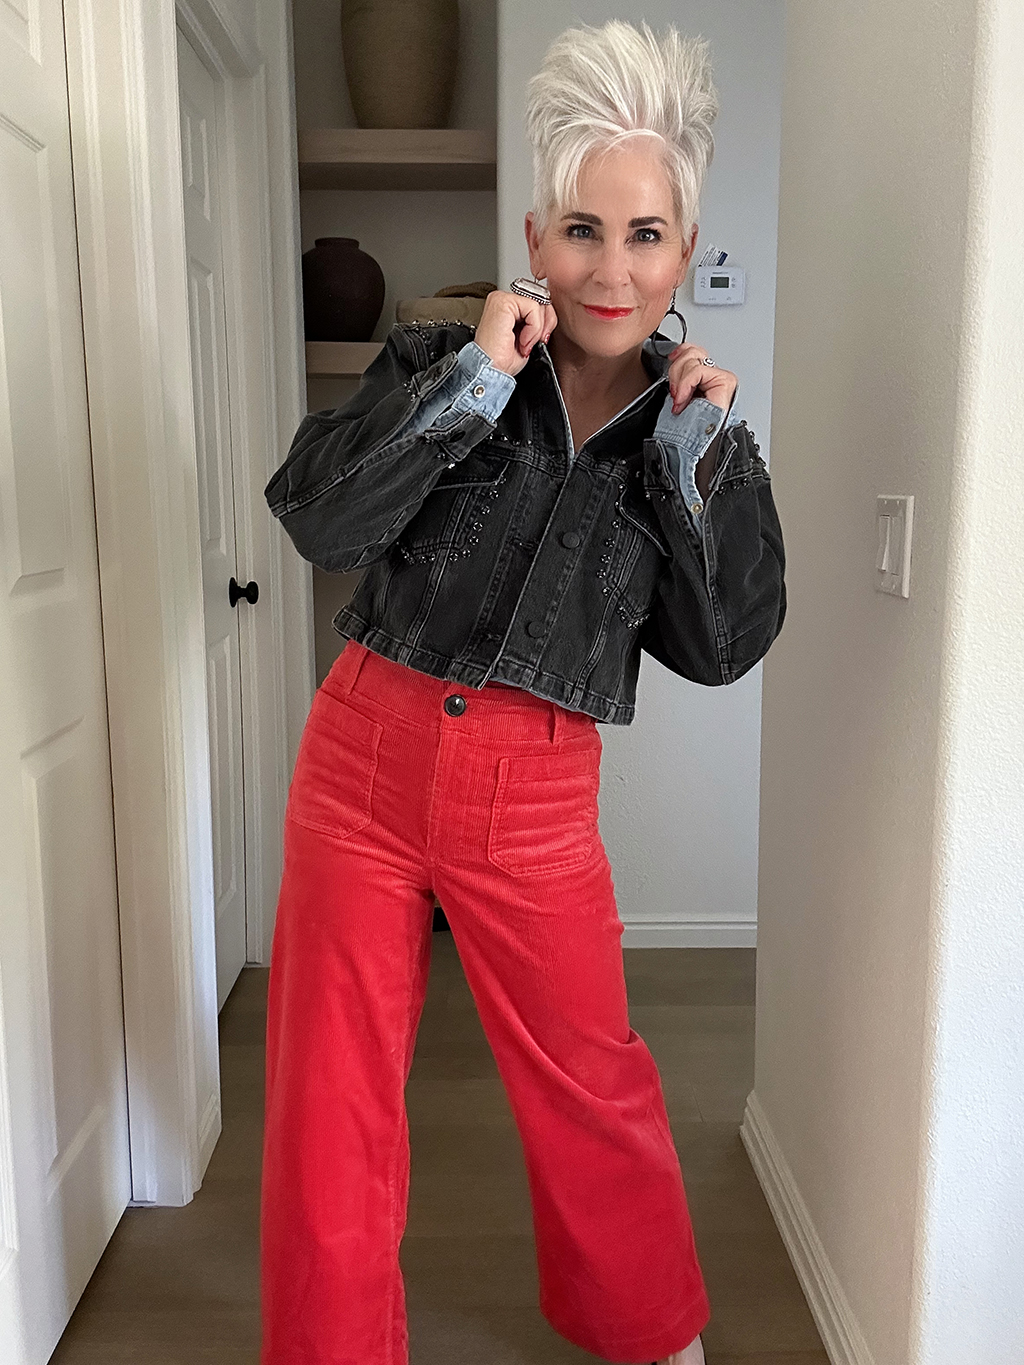 RED PANTS A CLOSET ESSENTIAL - Chic Over 50